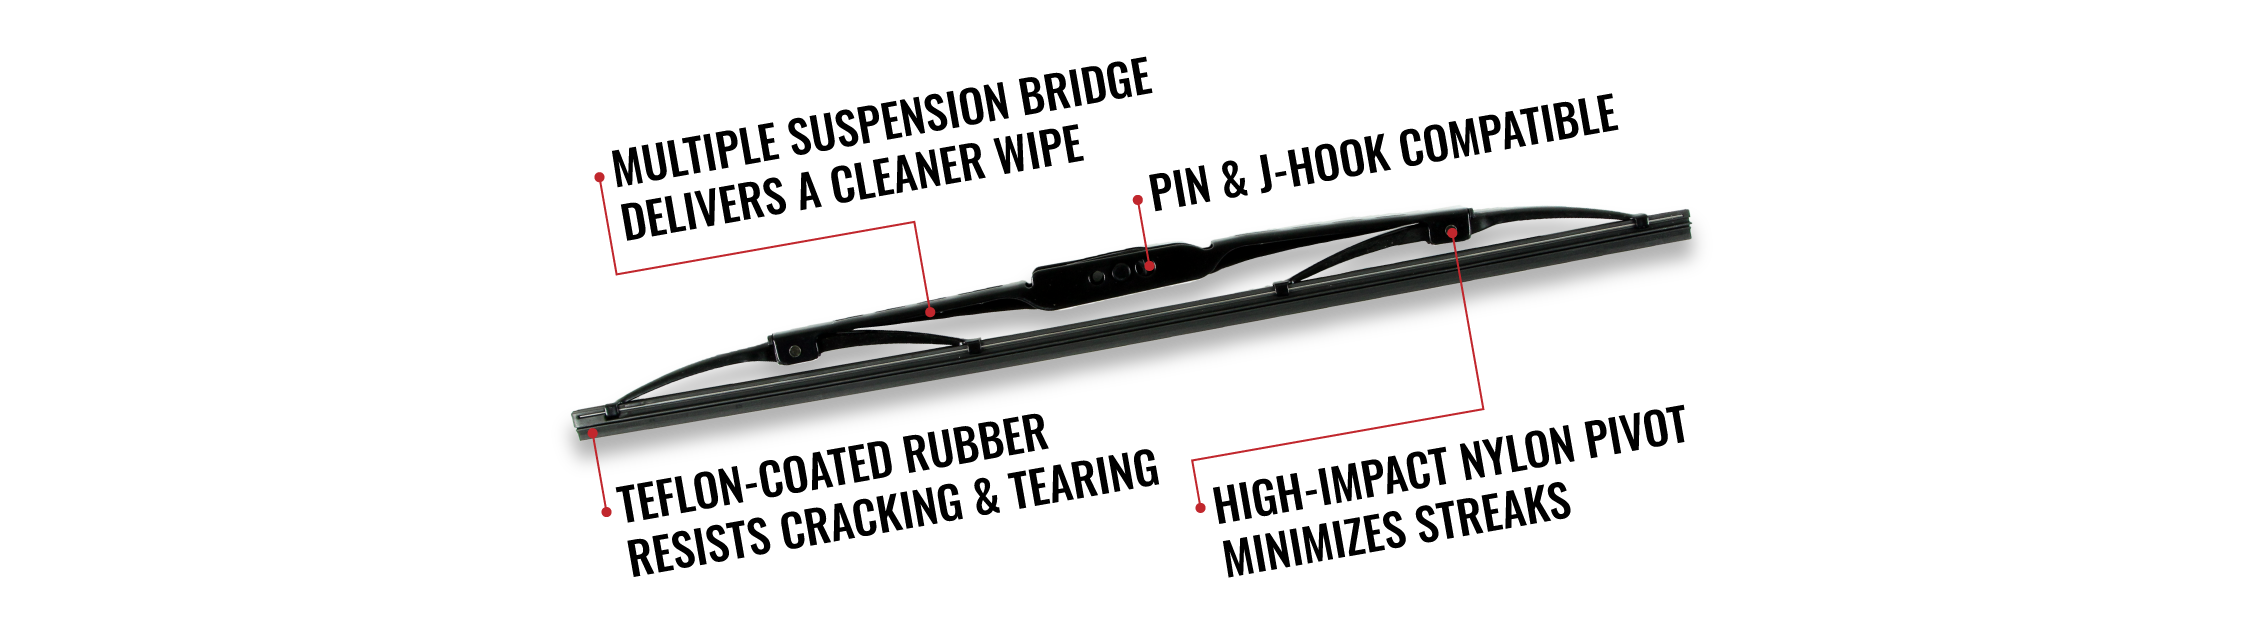 Sixity Auto Framed Windshield Wipers